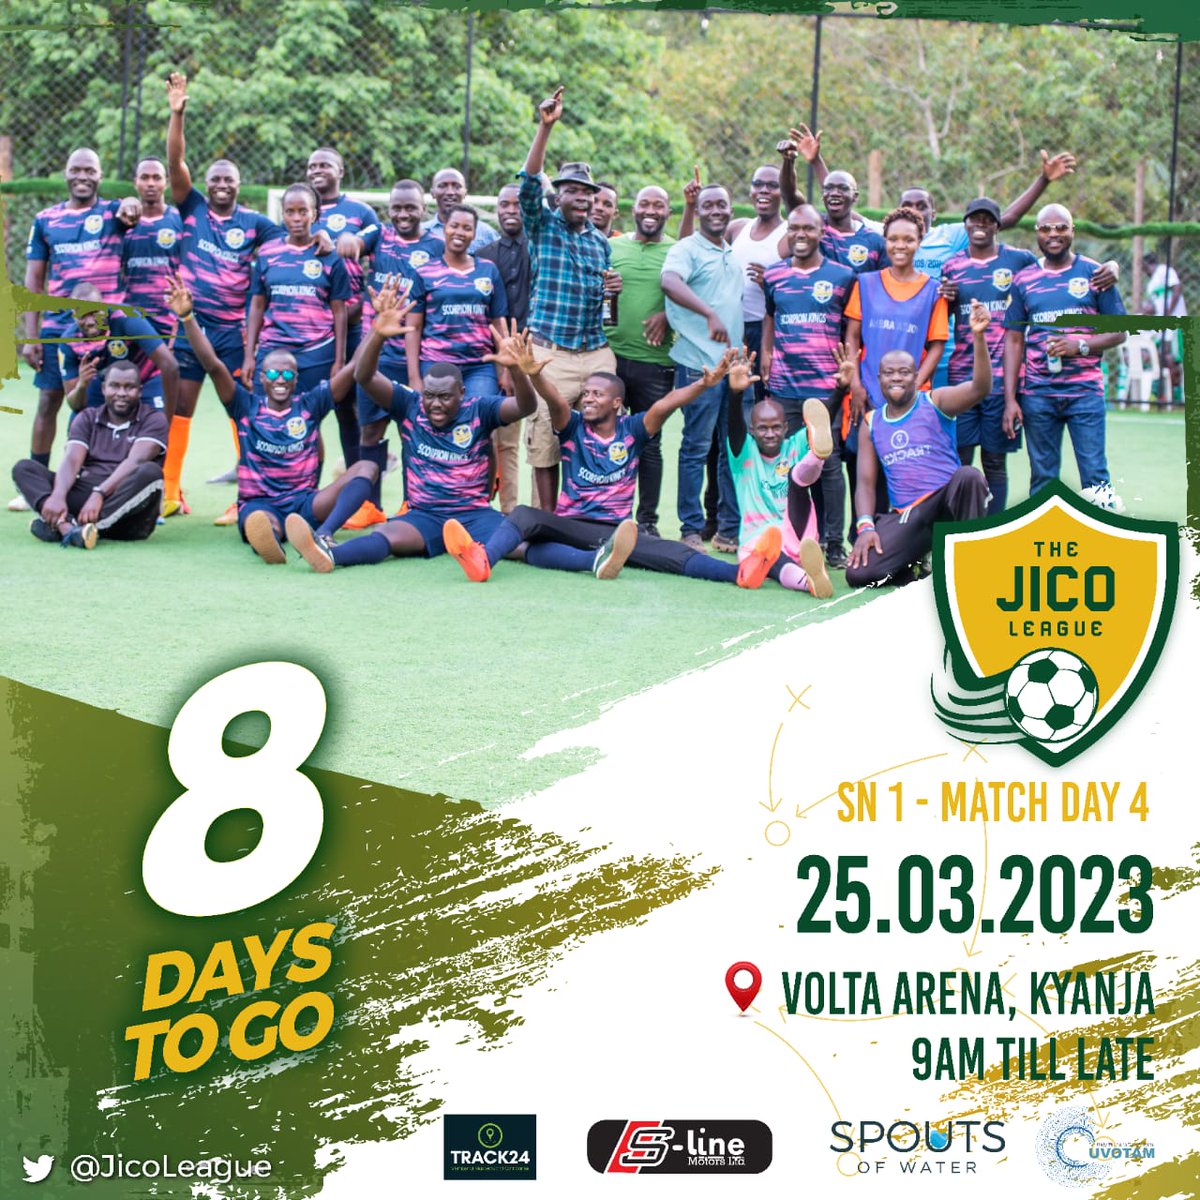 LET'S SEE THIS THRU because 'We are only as strong as we are united, as weak as we are divided.' – J.K. Rowling
#Jicoleague_beyondthegame 

Come all yee Iguanaz @thejicoba @Scorpionkings04 @MboyoFc @MbuyagaFC @Solida_FC @Oweinatafeeyo @KibaatiFc